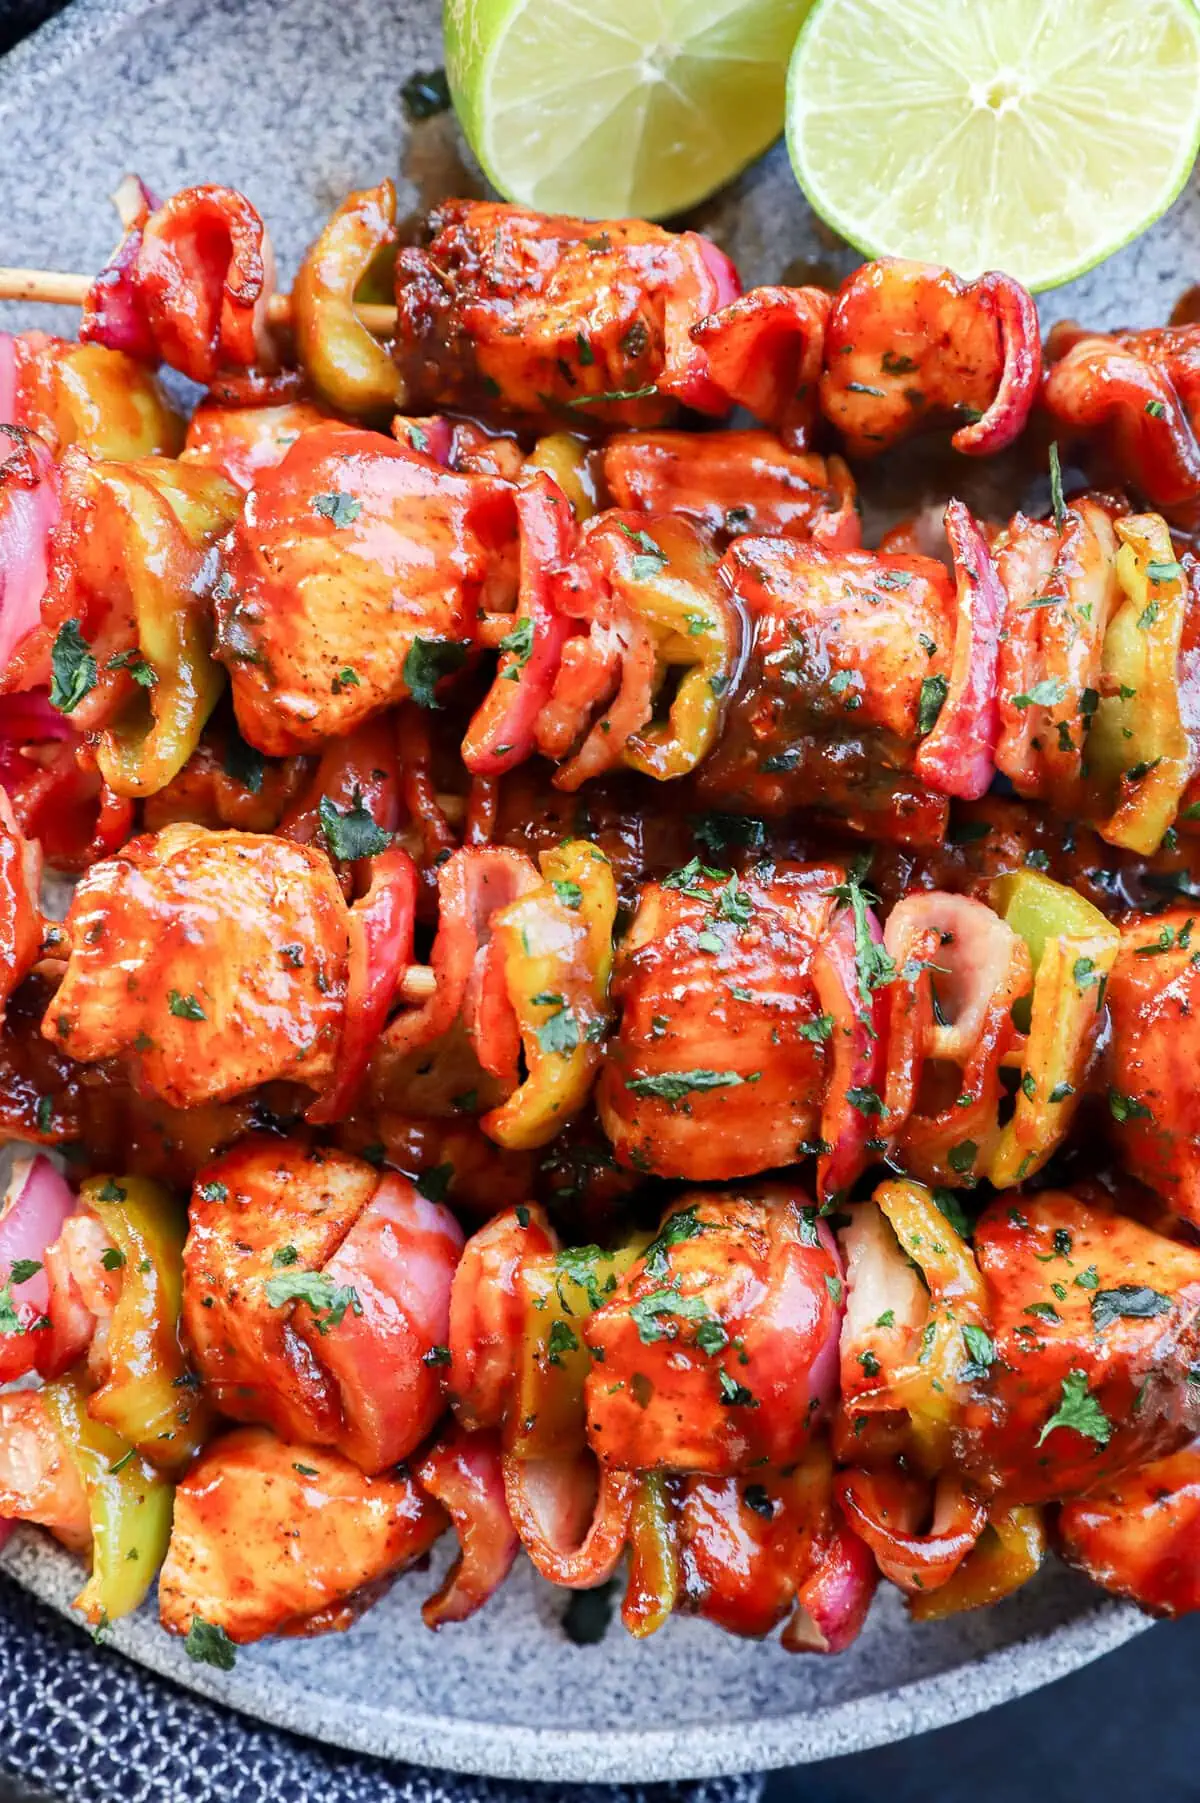 Skewers of chicken, bacon, onion, and bell pepper with bbq sauce